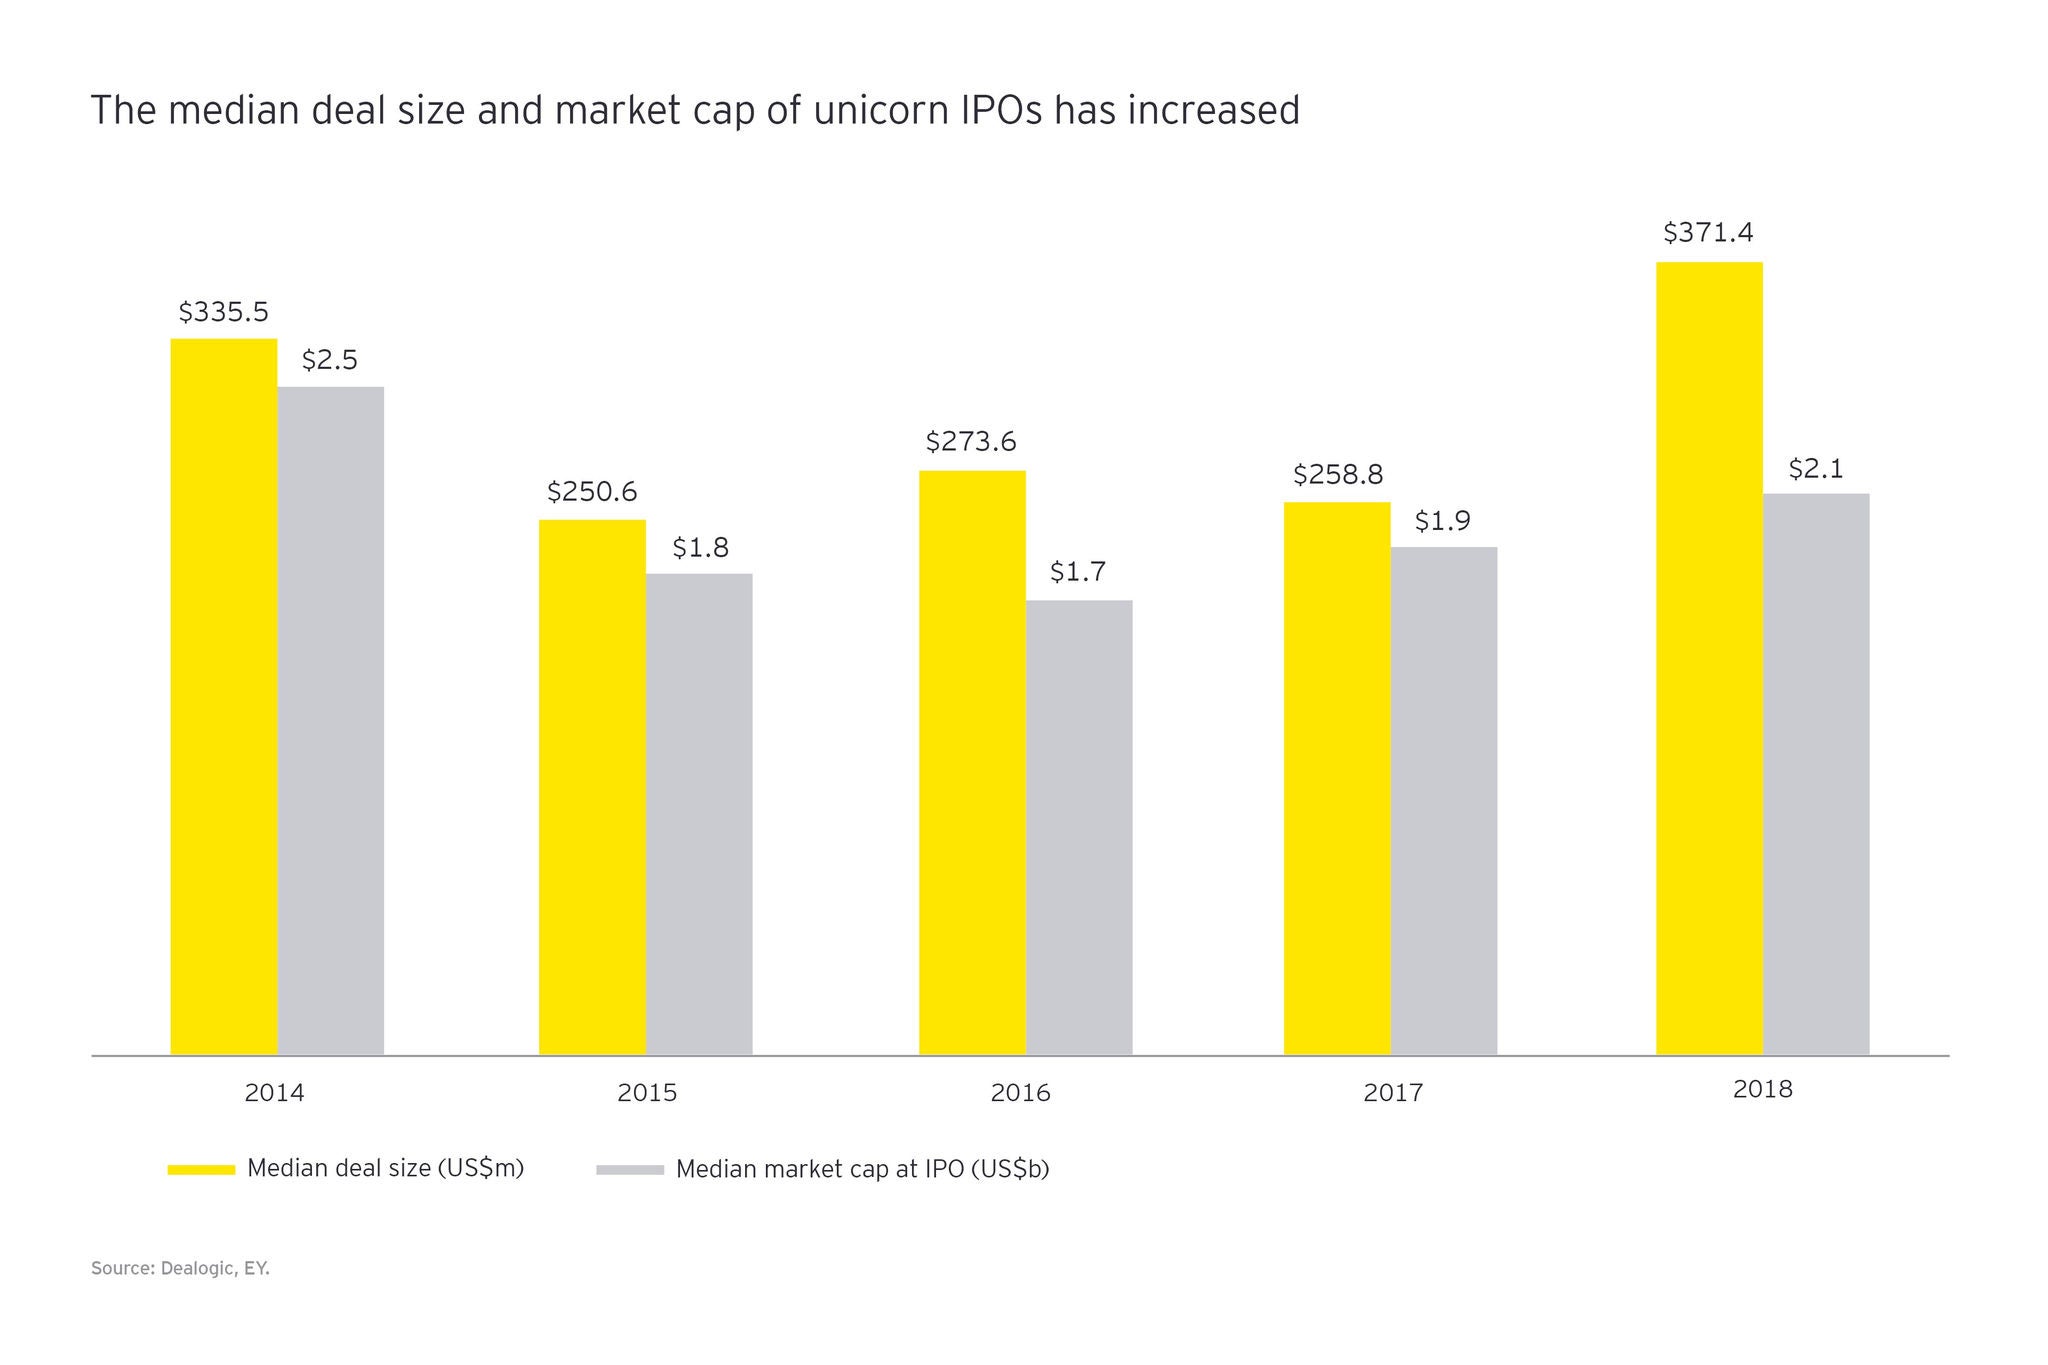 The media deal size and market cap of unicorn IPOs